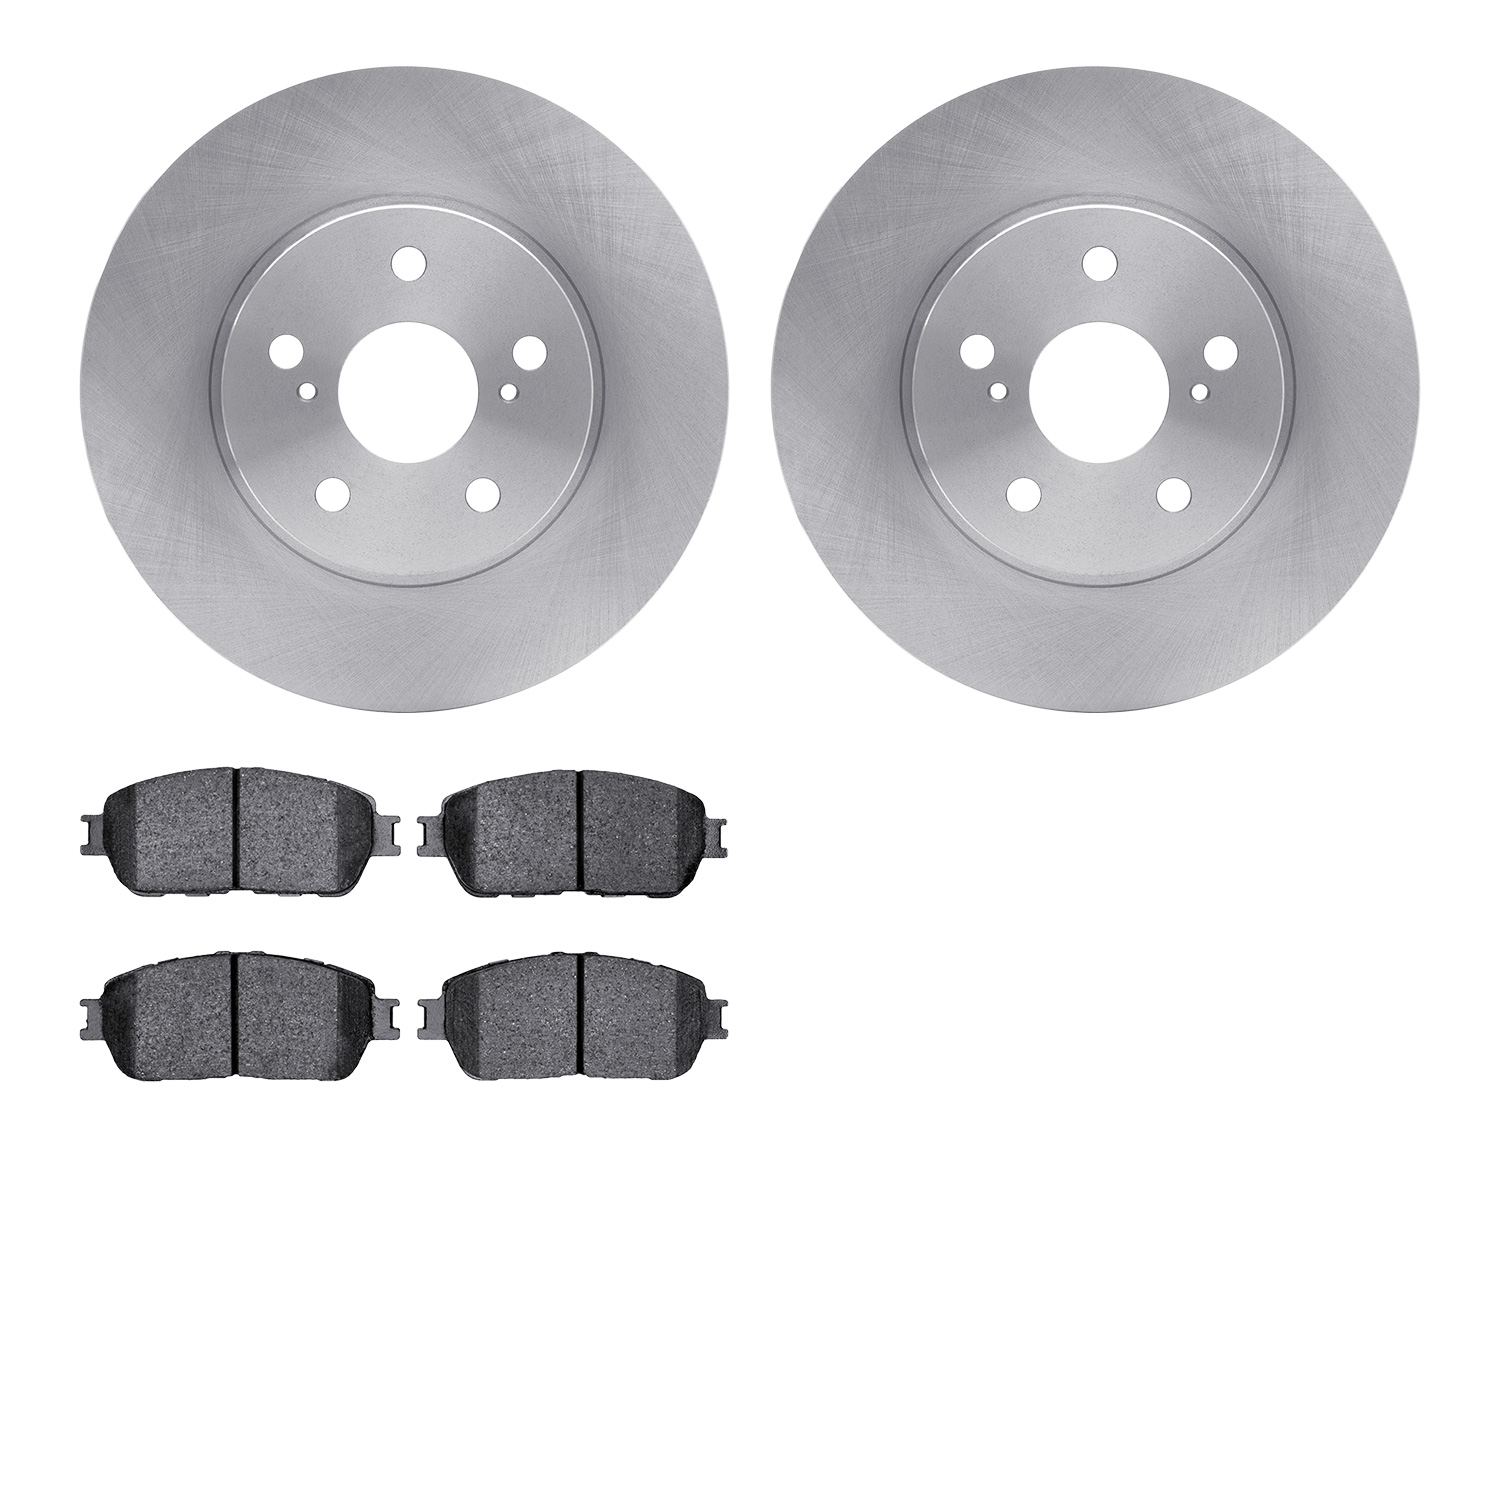 6402-76001 Brake Rotors with Ultimate-Duty Brake Pads, 2004-2010 Lexus/Toyota/Scion, Position: Front